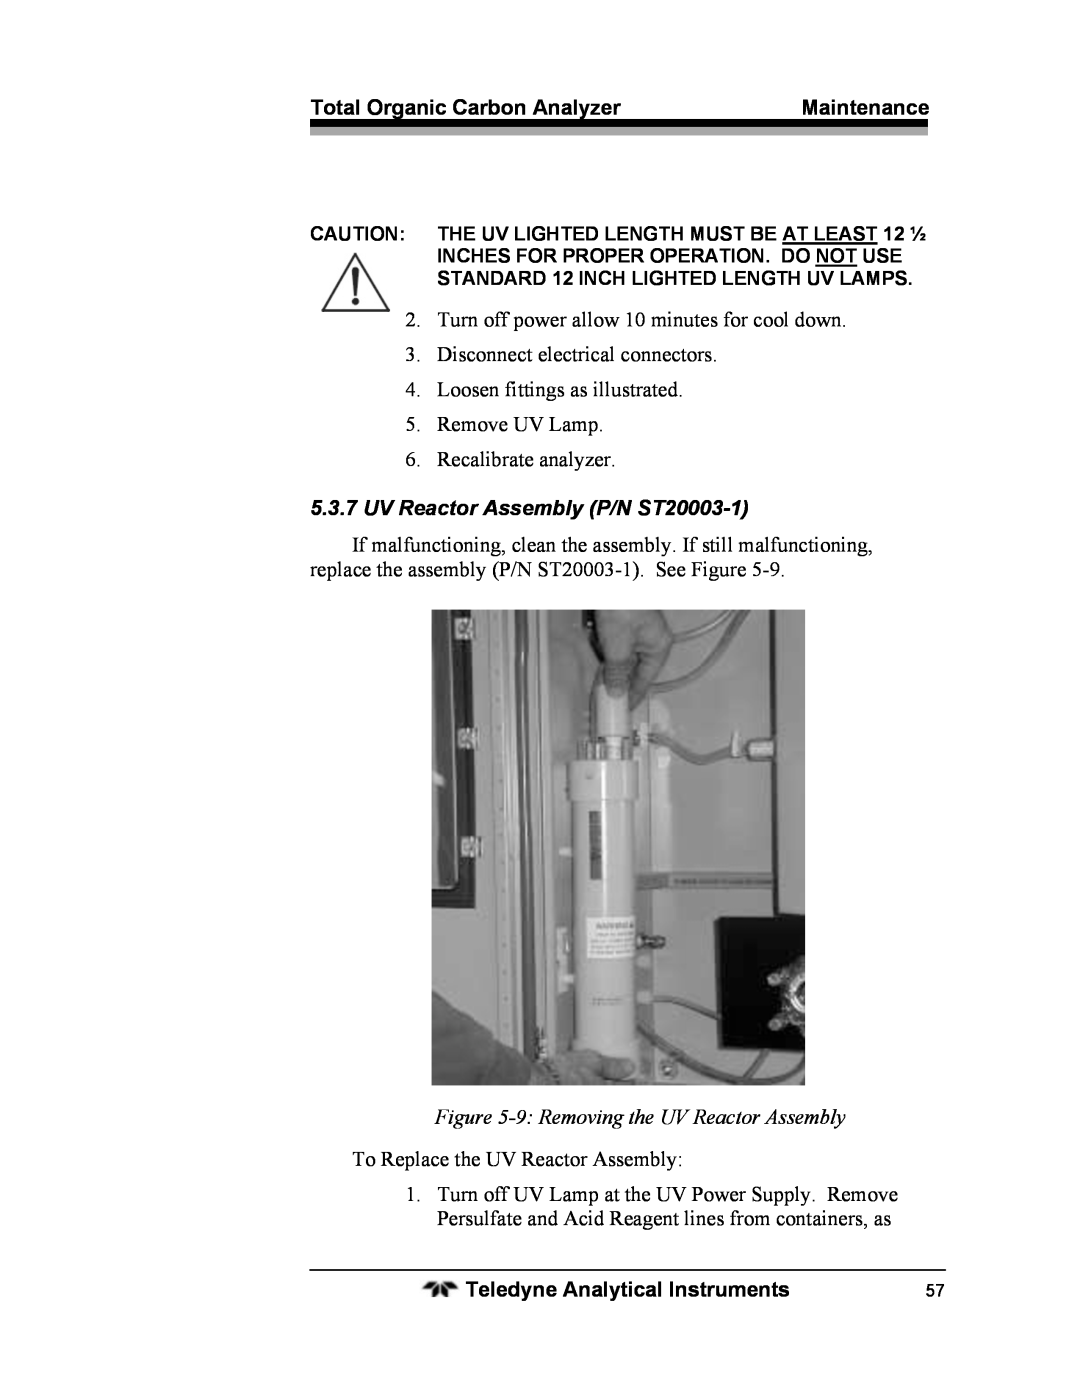 Teledyne 6750 operating instructions 5.3.7UV Reactor Assembly P/N ST20003-1, 9:Removing the UV Reactor Assembly 